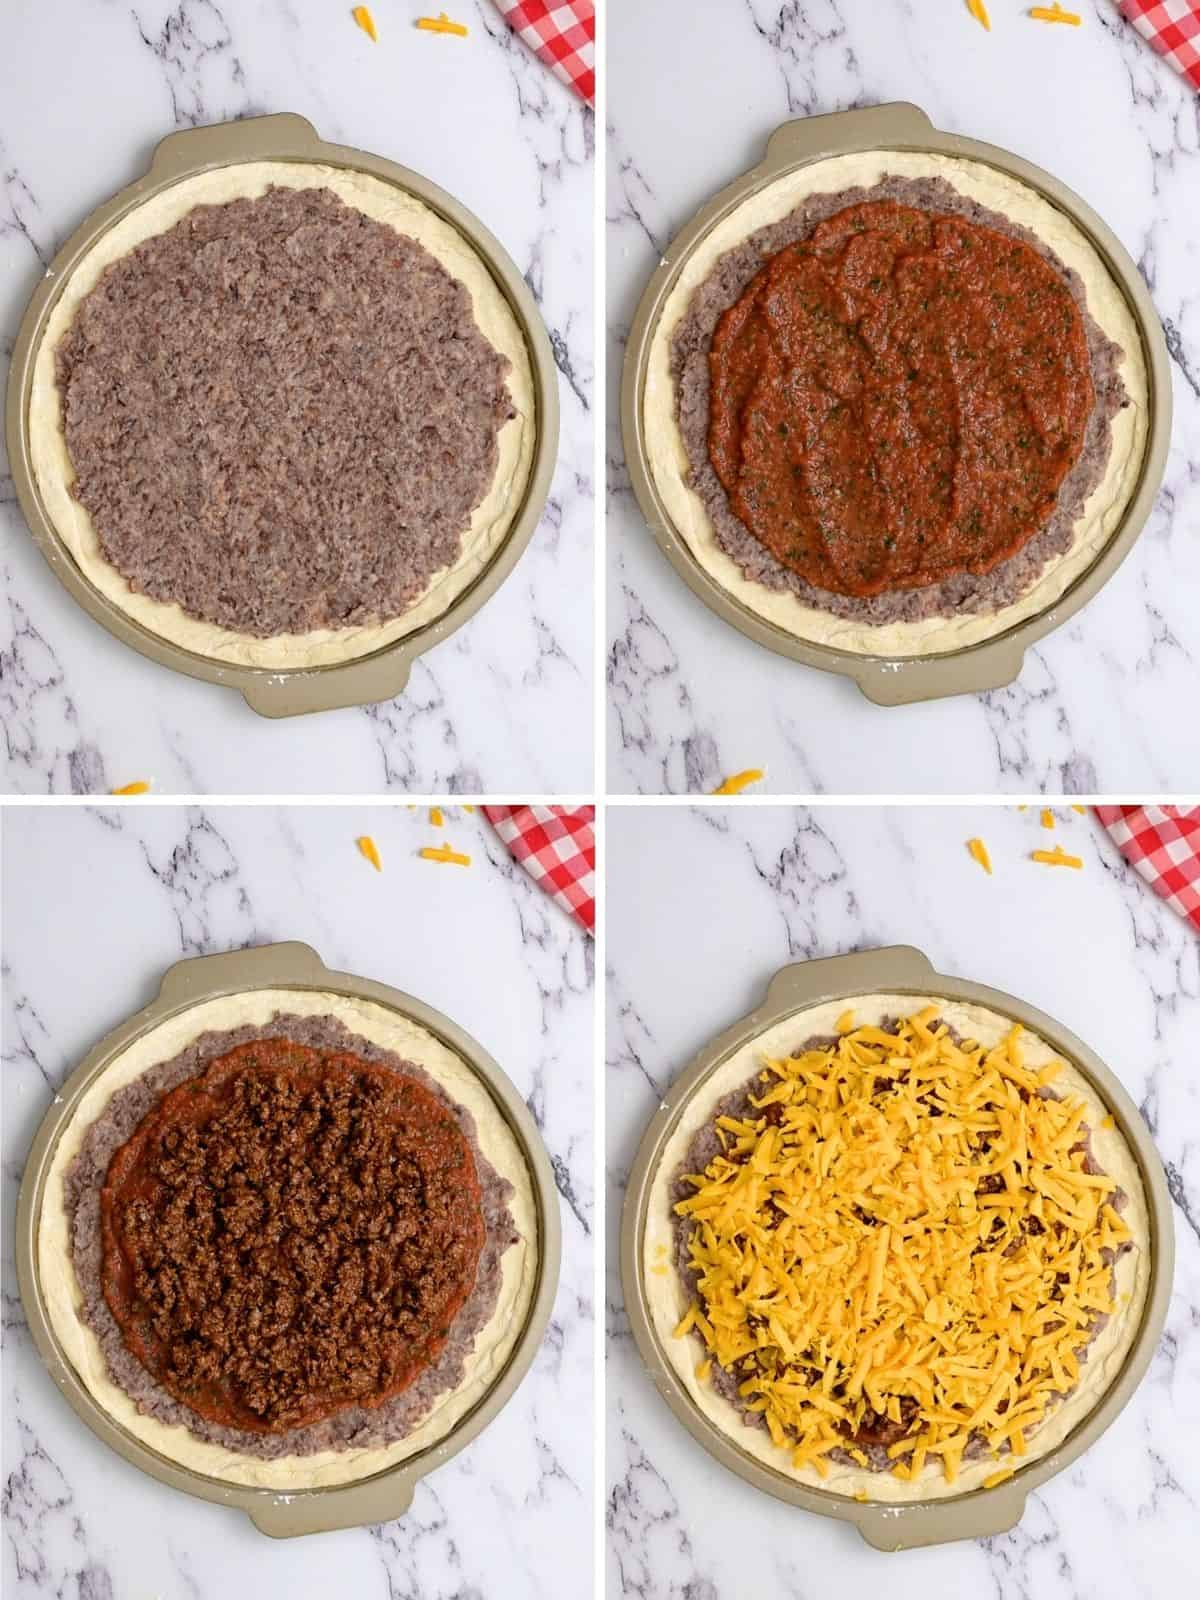 Collage of 4 photos showing assembling taco pizza toppings.